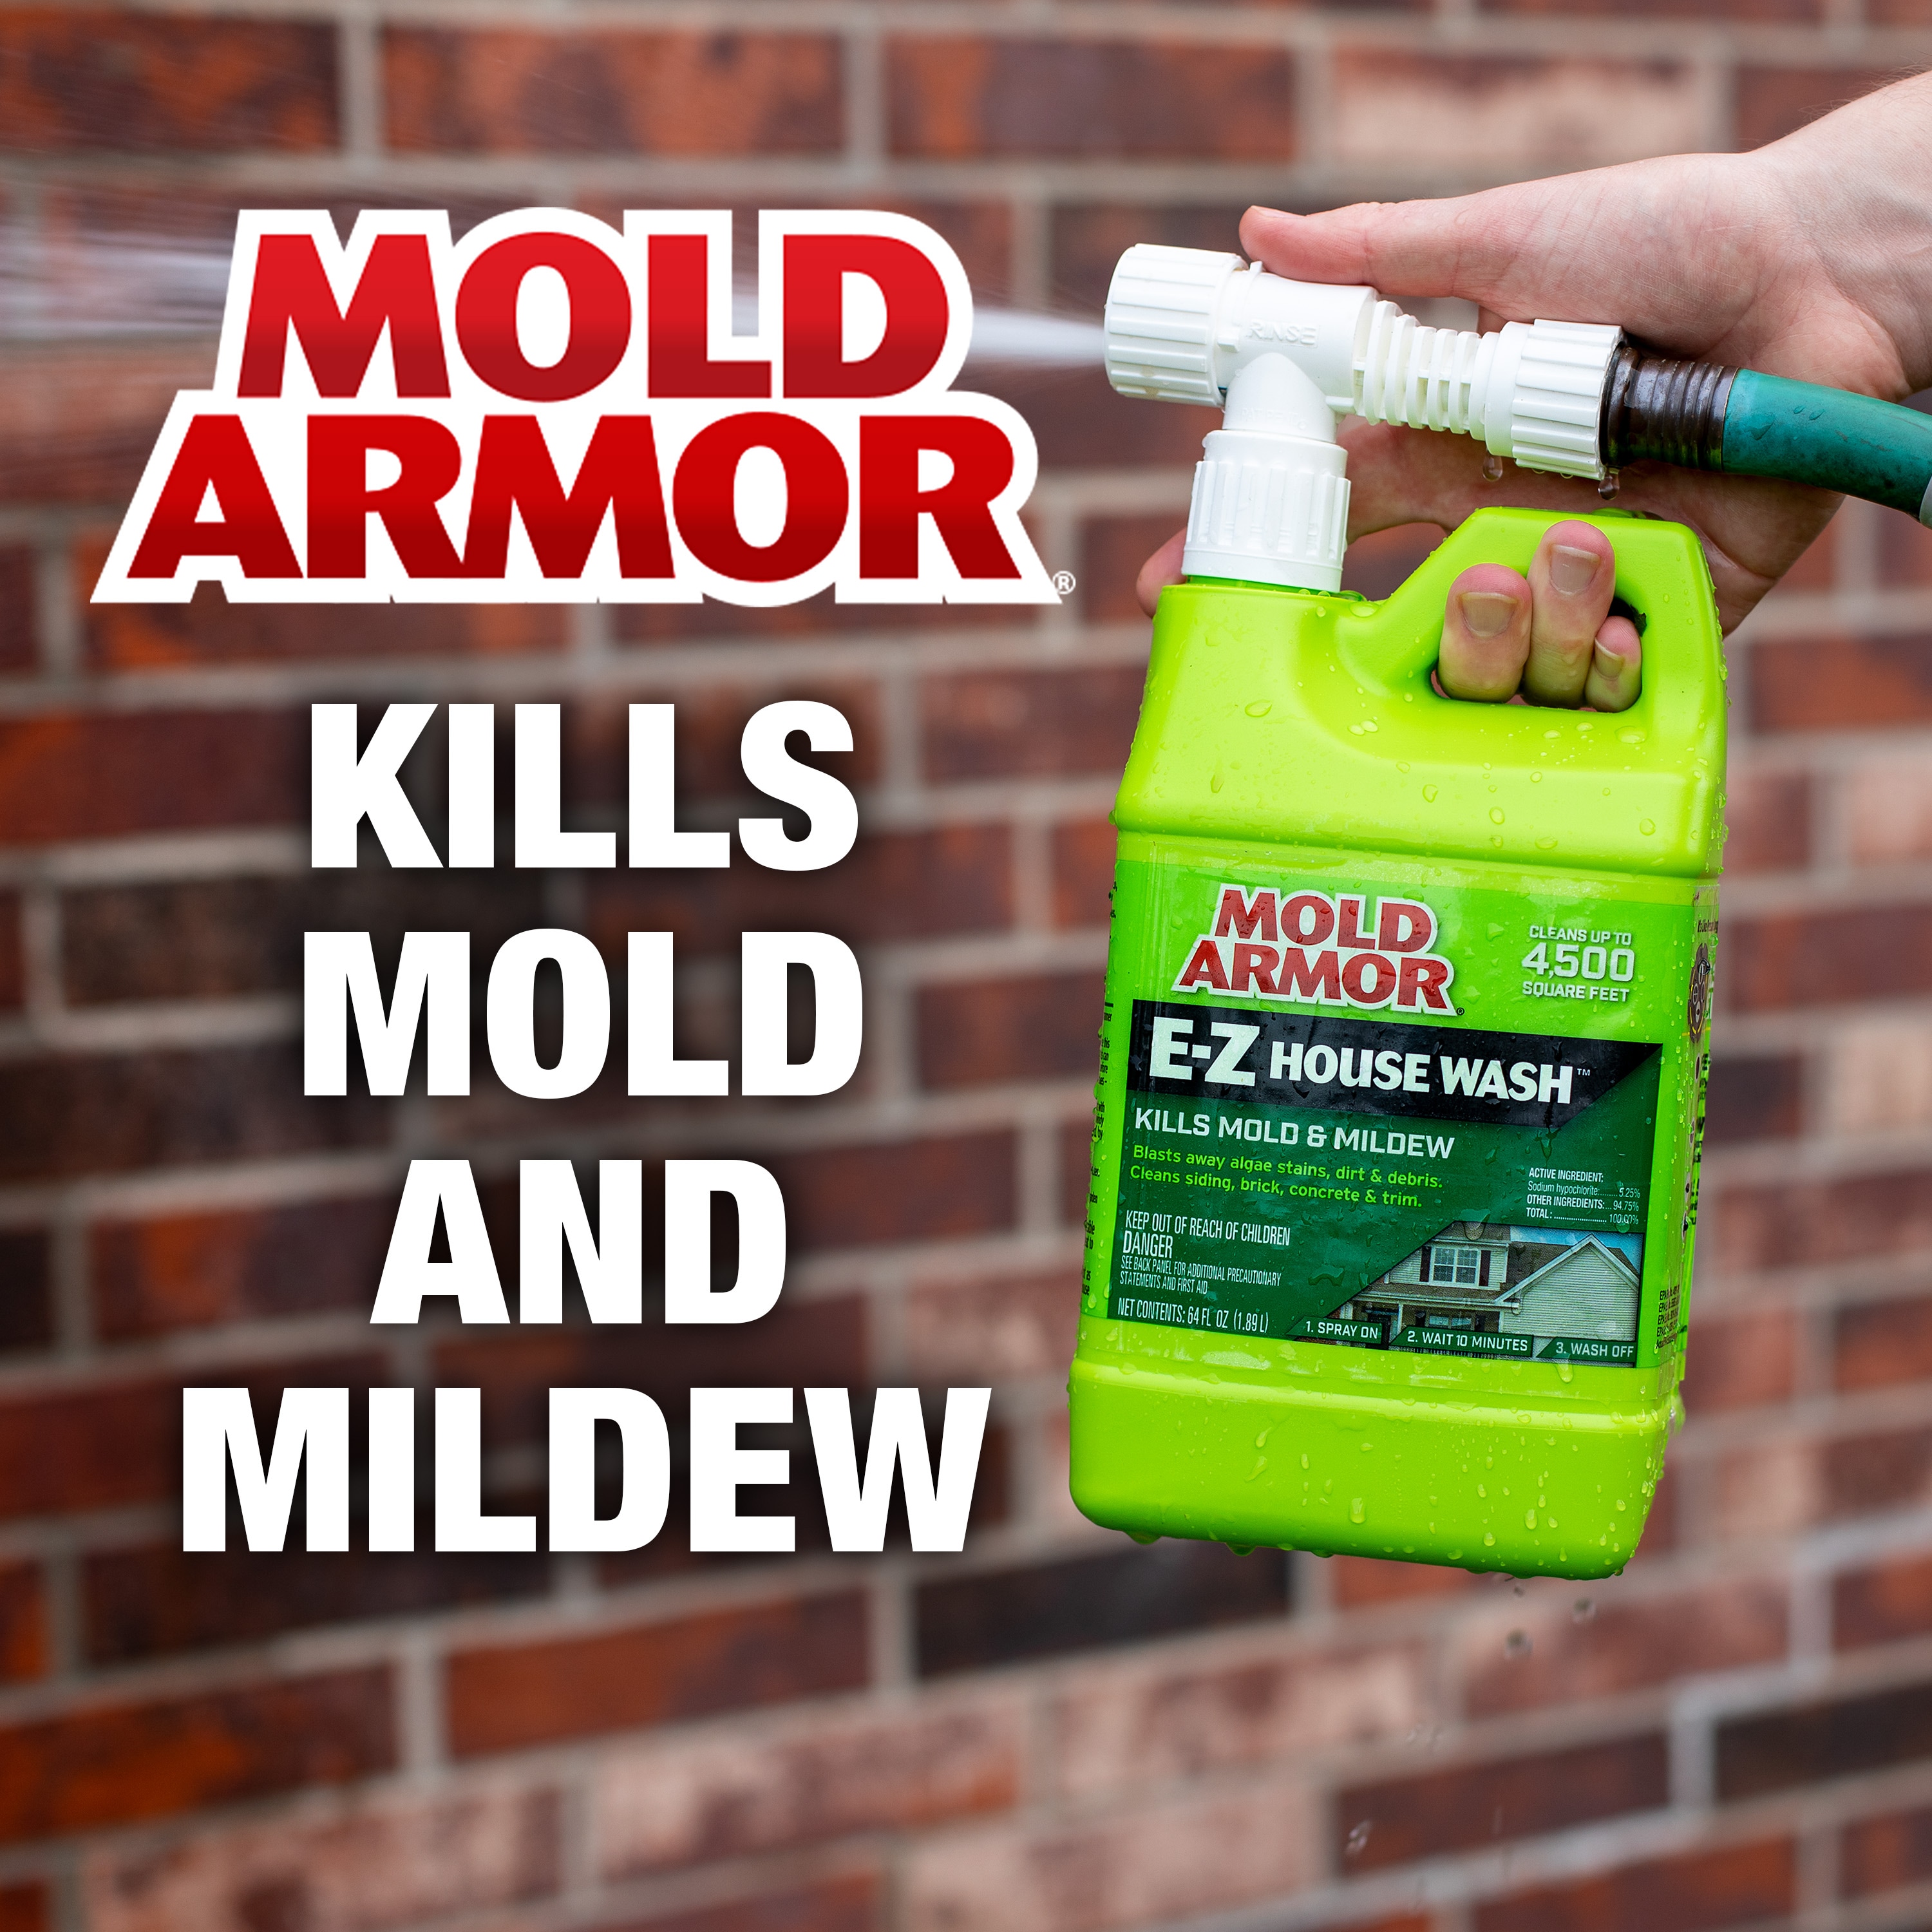 MOLD ARMOR Rapid Clean Remediation, 1 Gallon; Kills, Cleans & Prevents Mold  & Mildew - Mold Armor